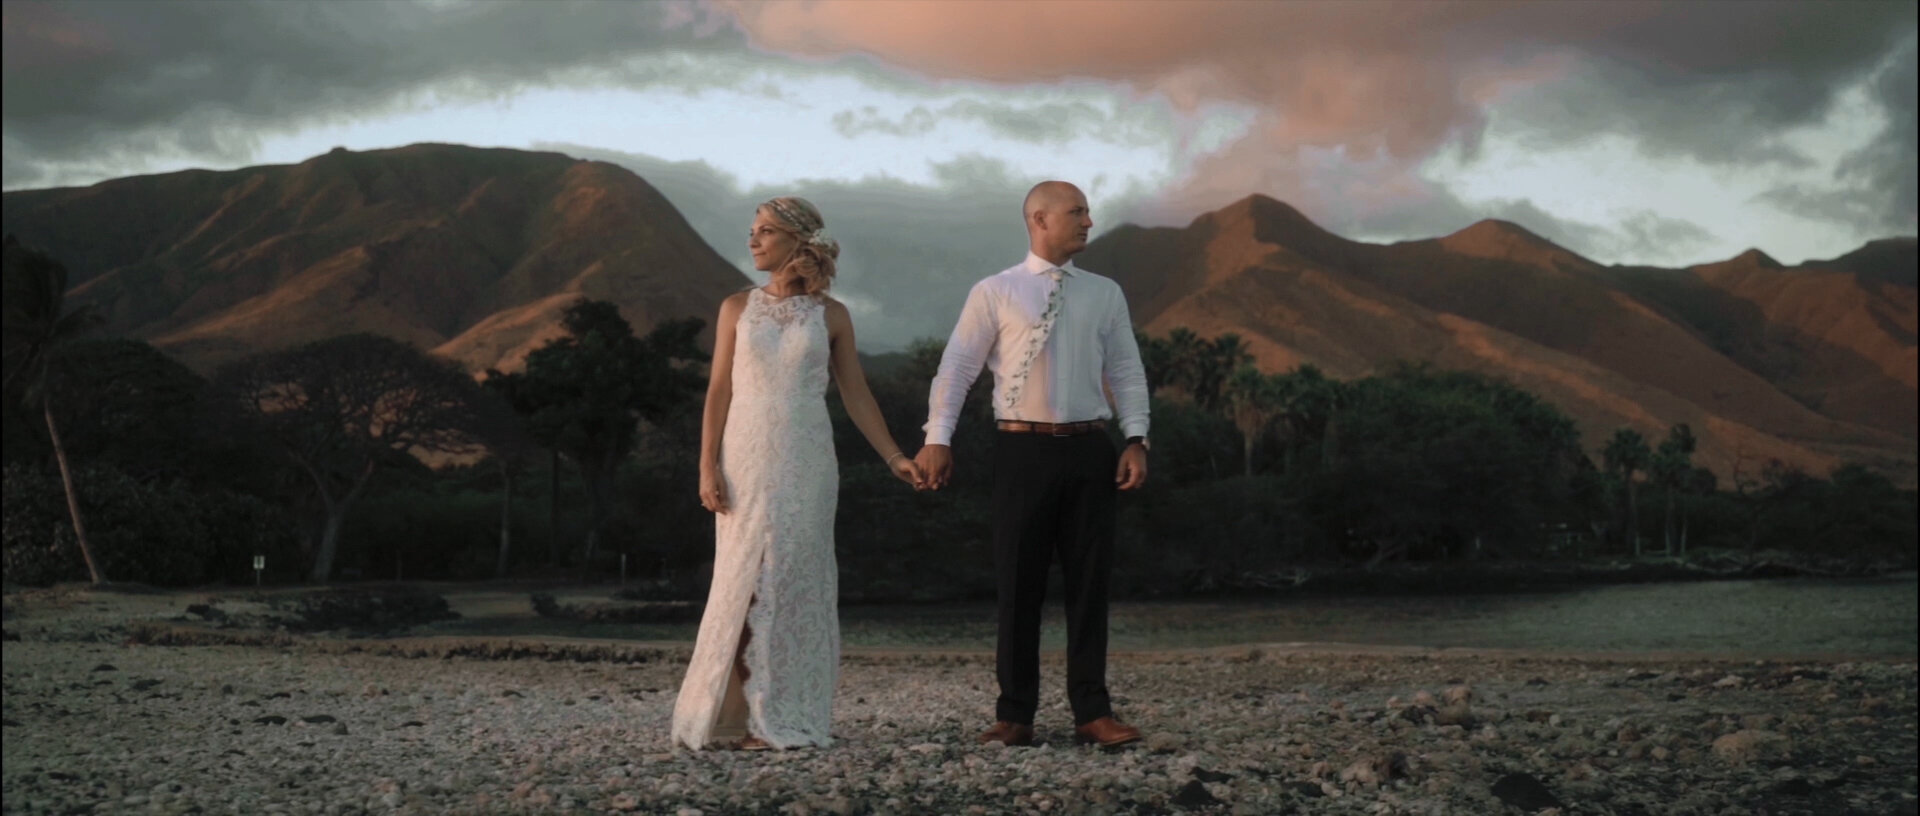 Bride and Groom at the Olowalu Plantation House Pier with mountains backdrop